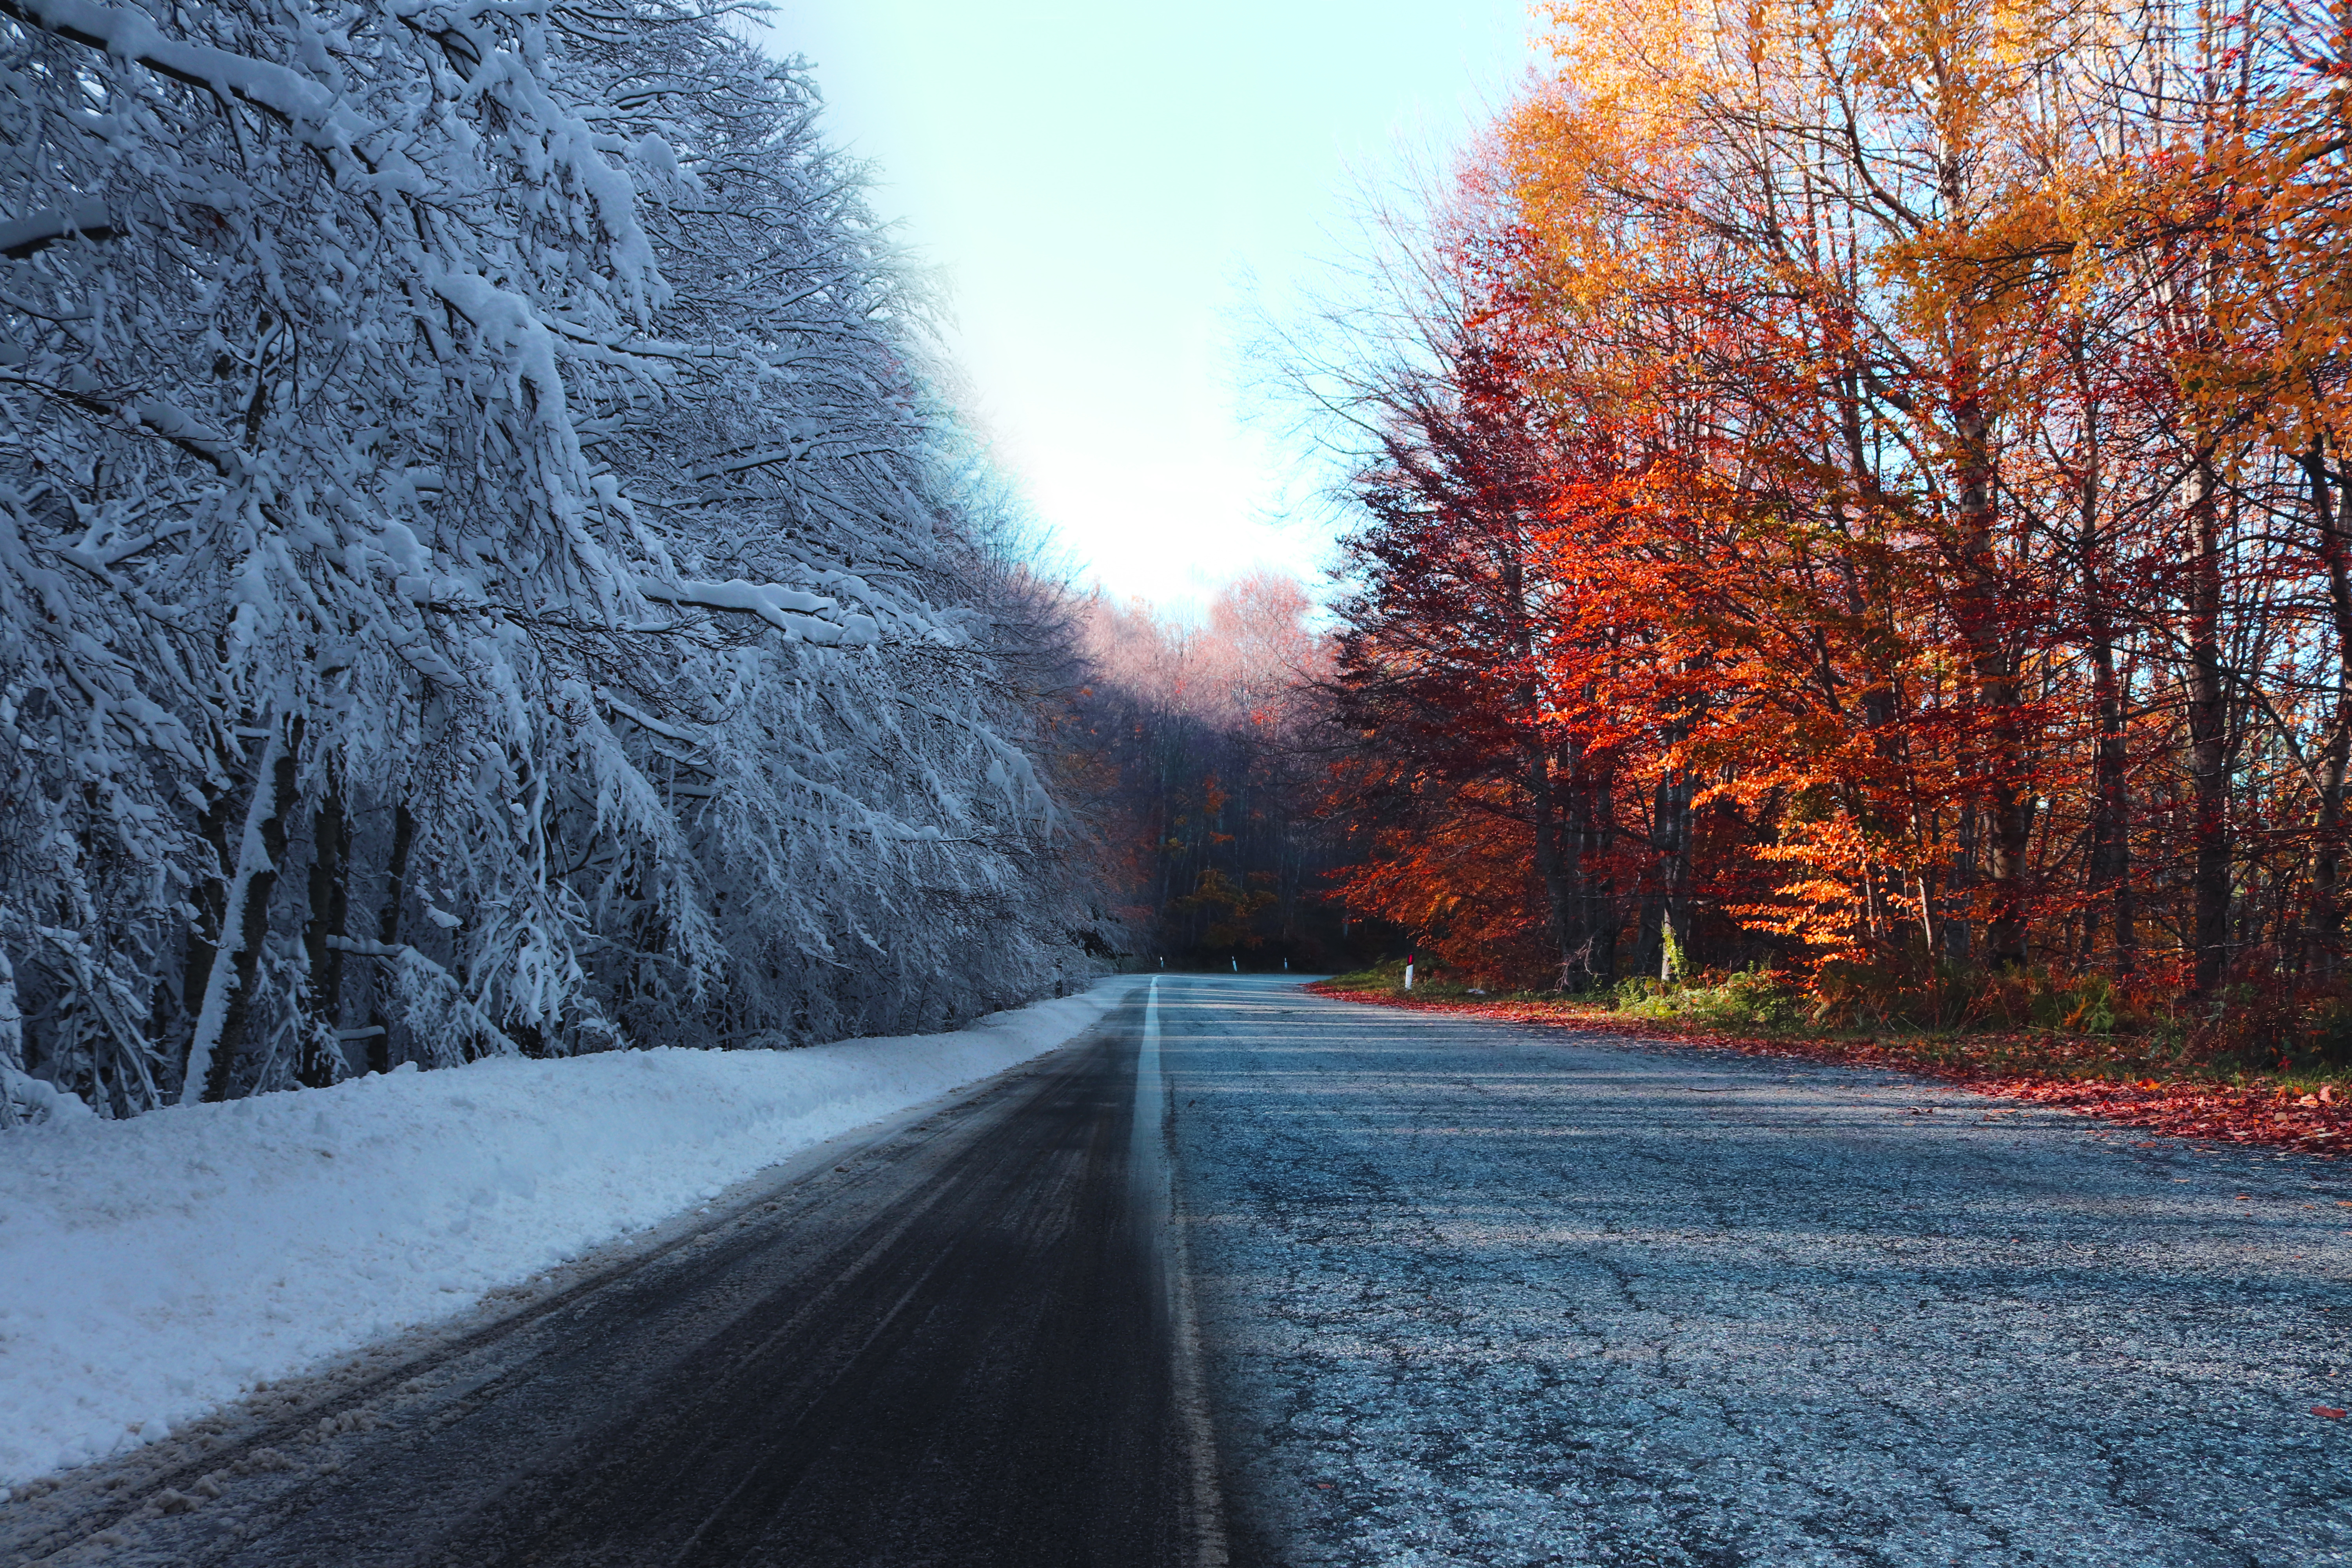 General 6000x4000 nature winter road landscape trees fall